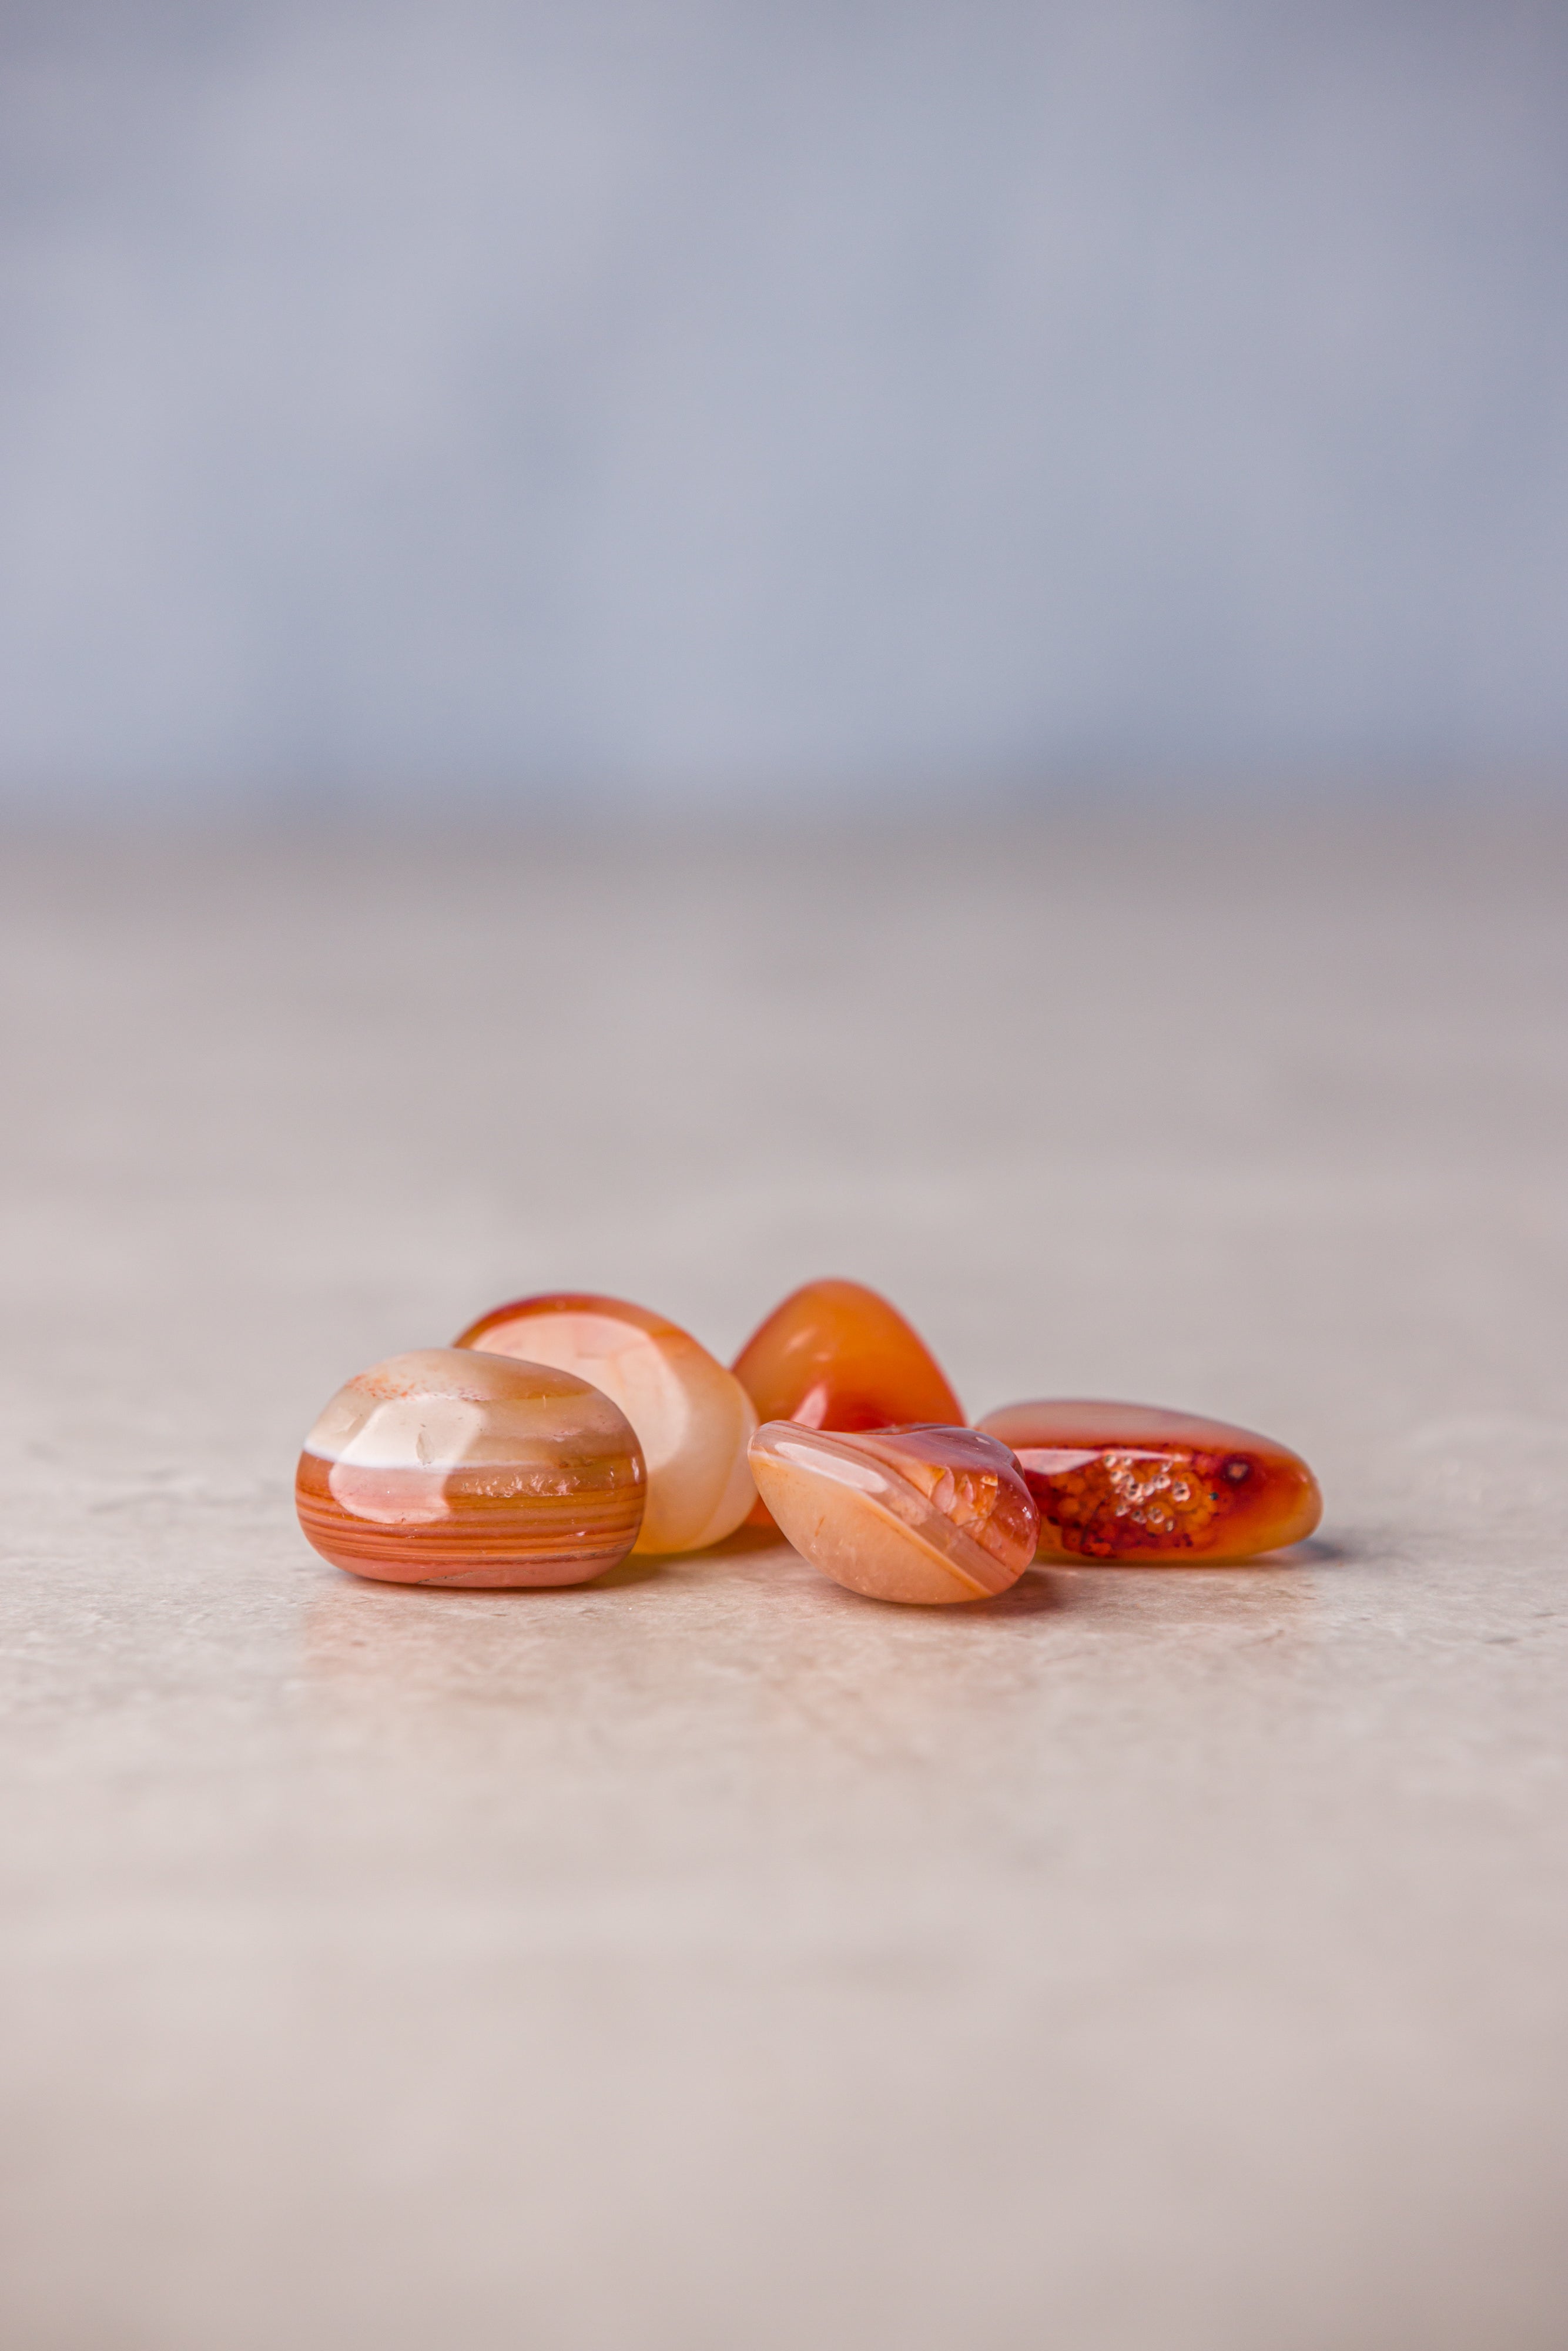 Carnelian - Energising Stone for Motivation and Courage - Everyday Rocks